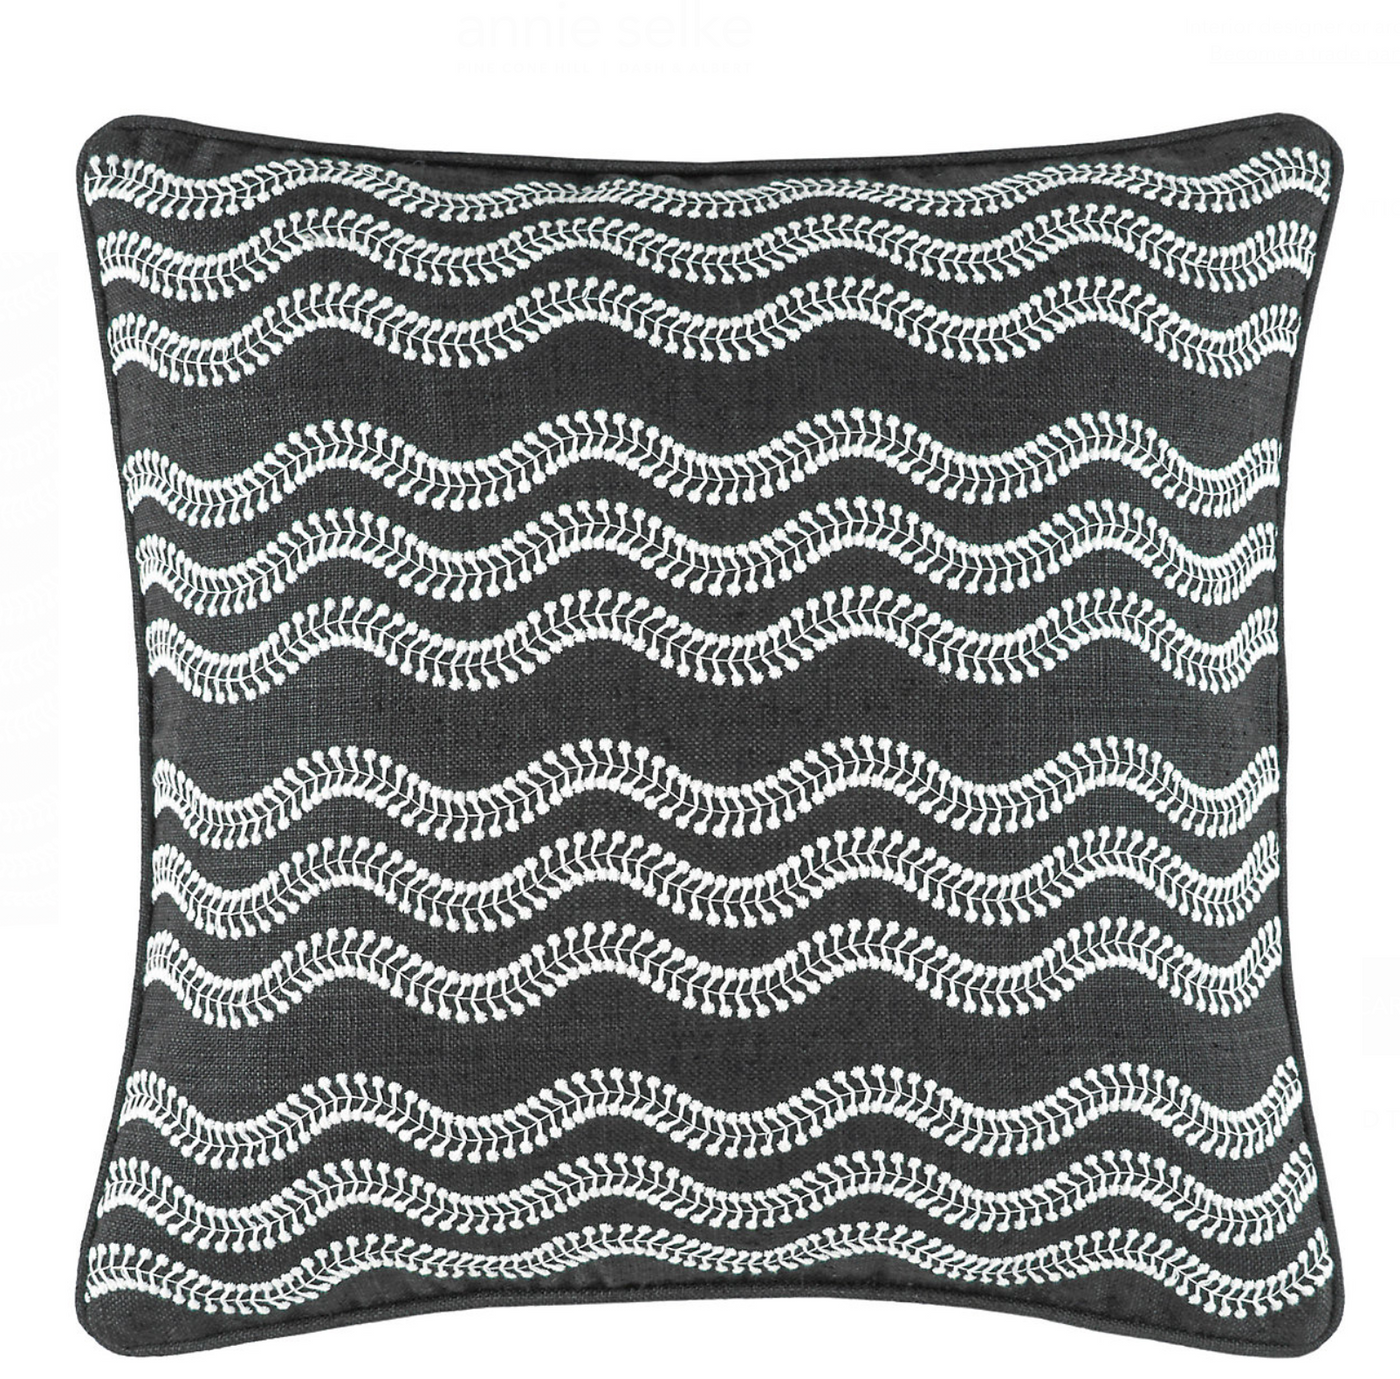 PILLOW DECORATIVE INDOOR/OUTDOOR WAVY STRIPES (Available in 3 Colors)